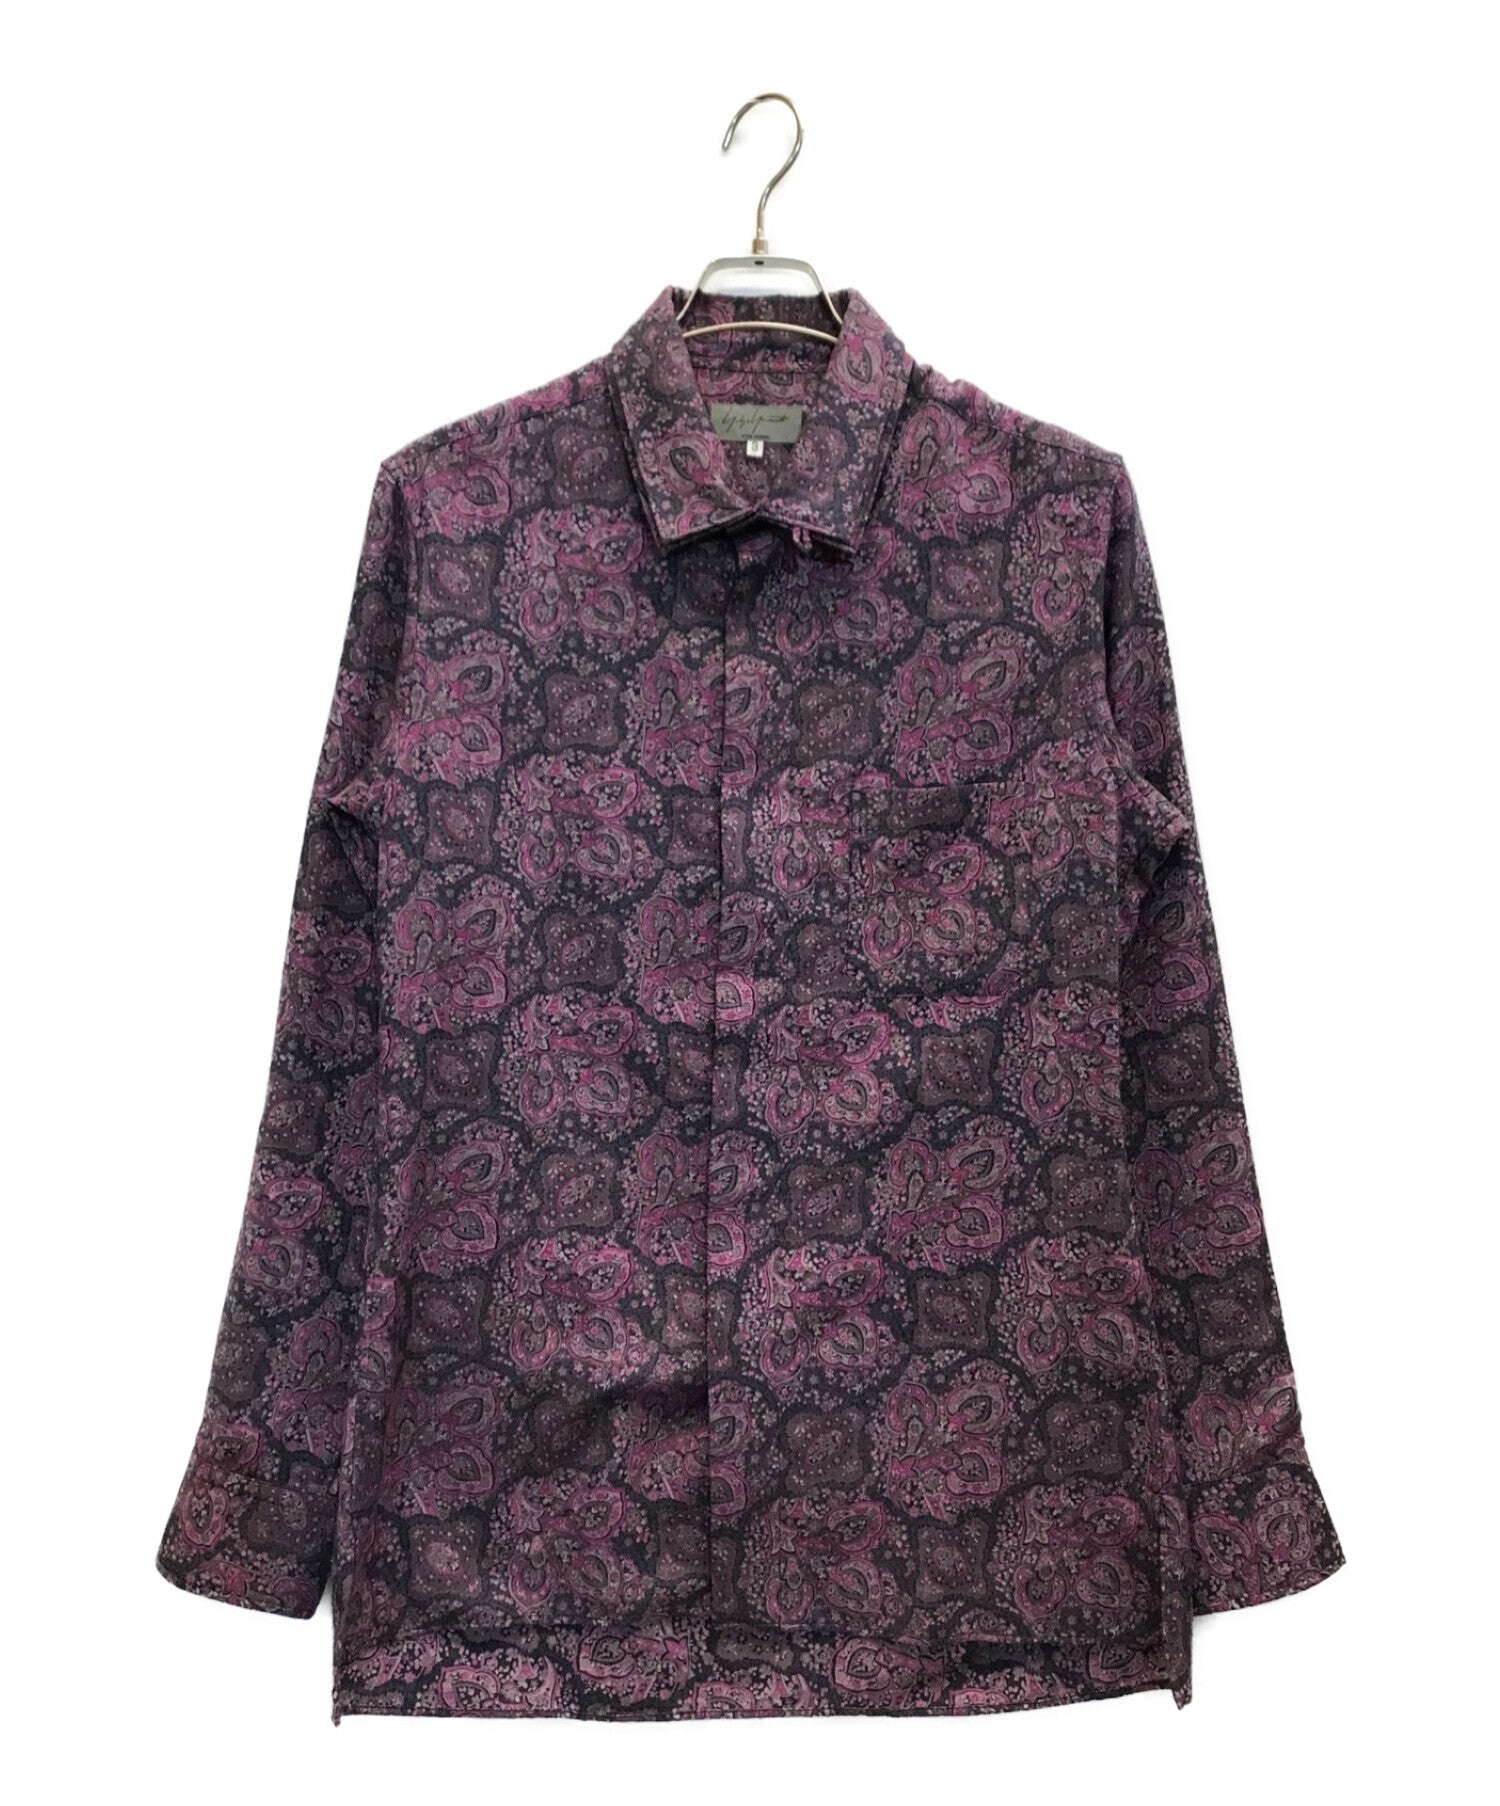 [Pre-owned] Yohji Yamamoto pour homme flower-patterned shirt HF-B07-90